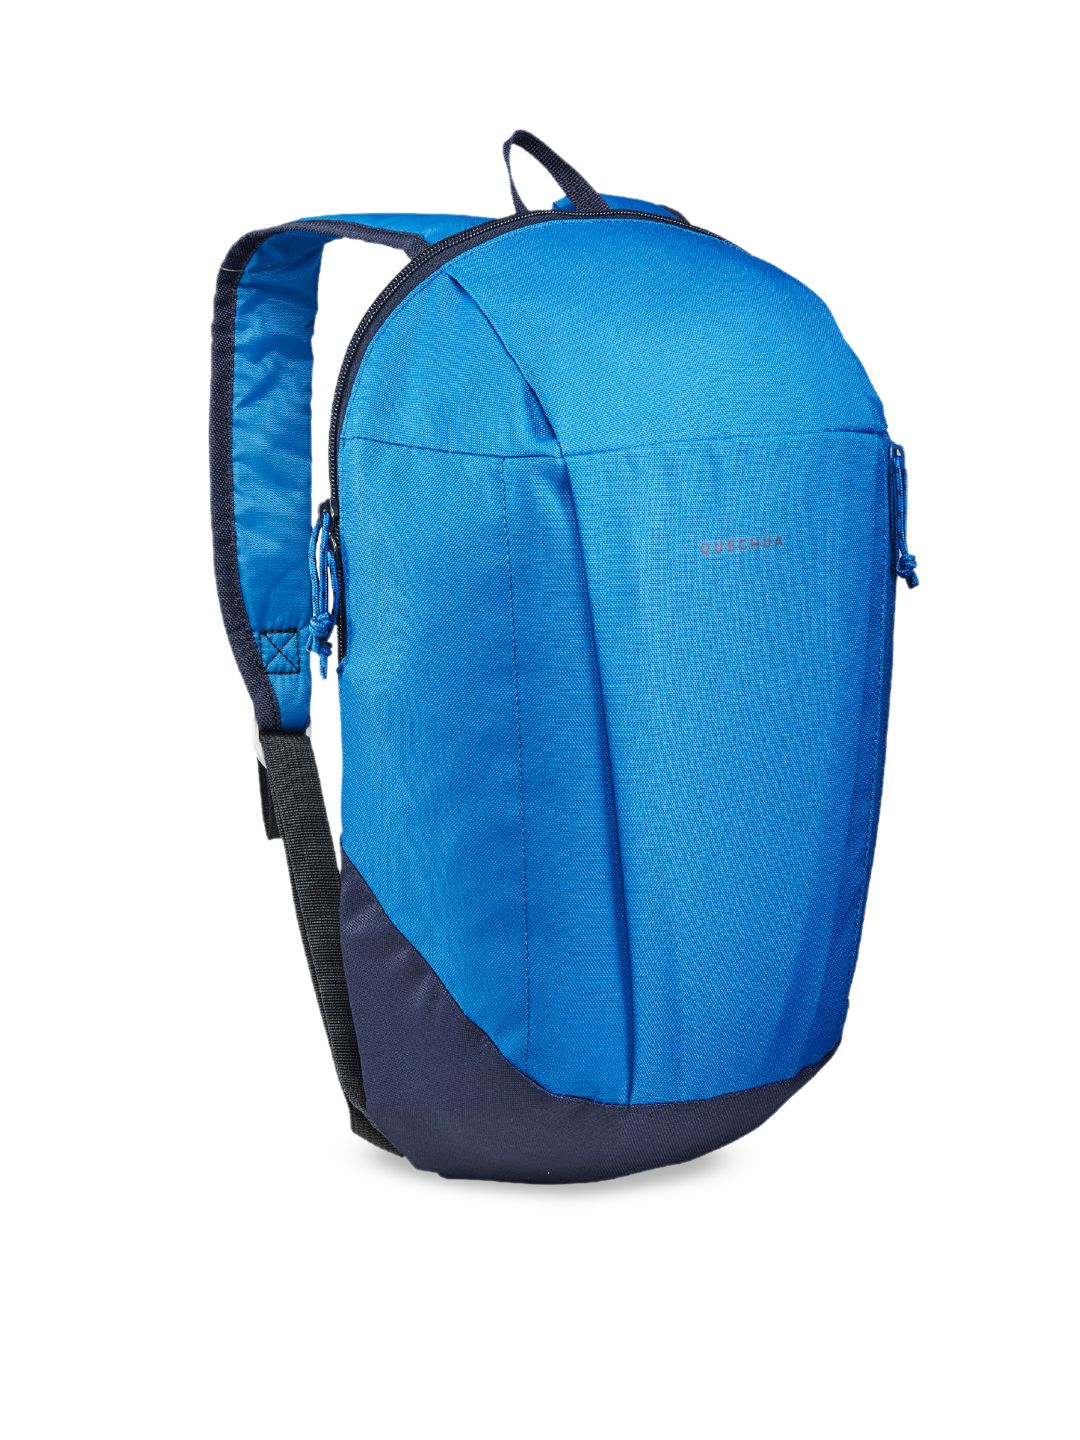 Quechua By Decathlon Unisex Blue Solid 10L Hiking Backpack Price in India